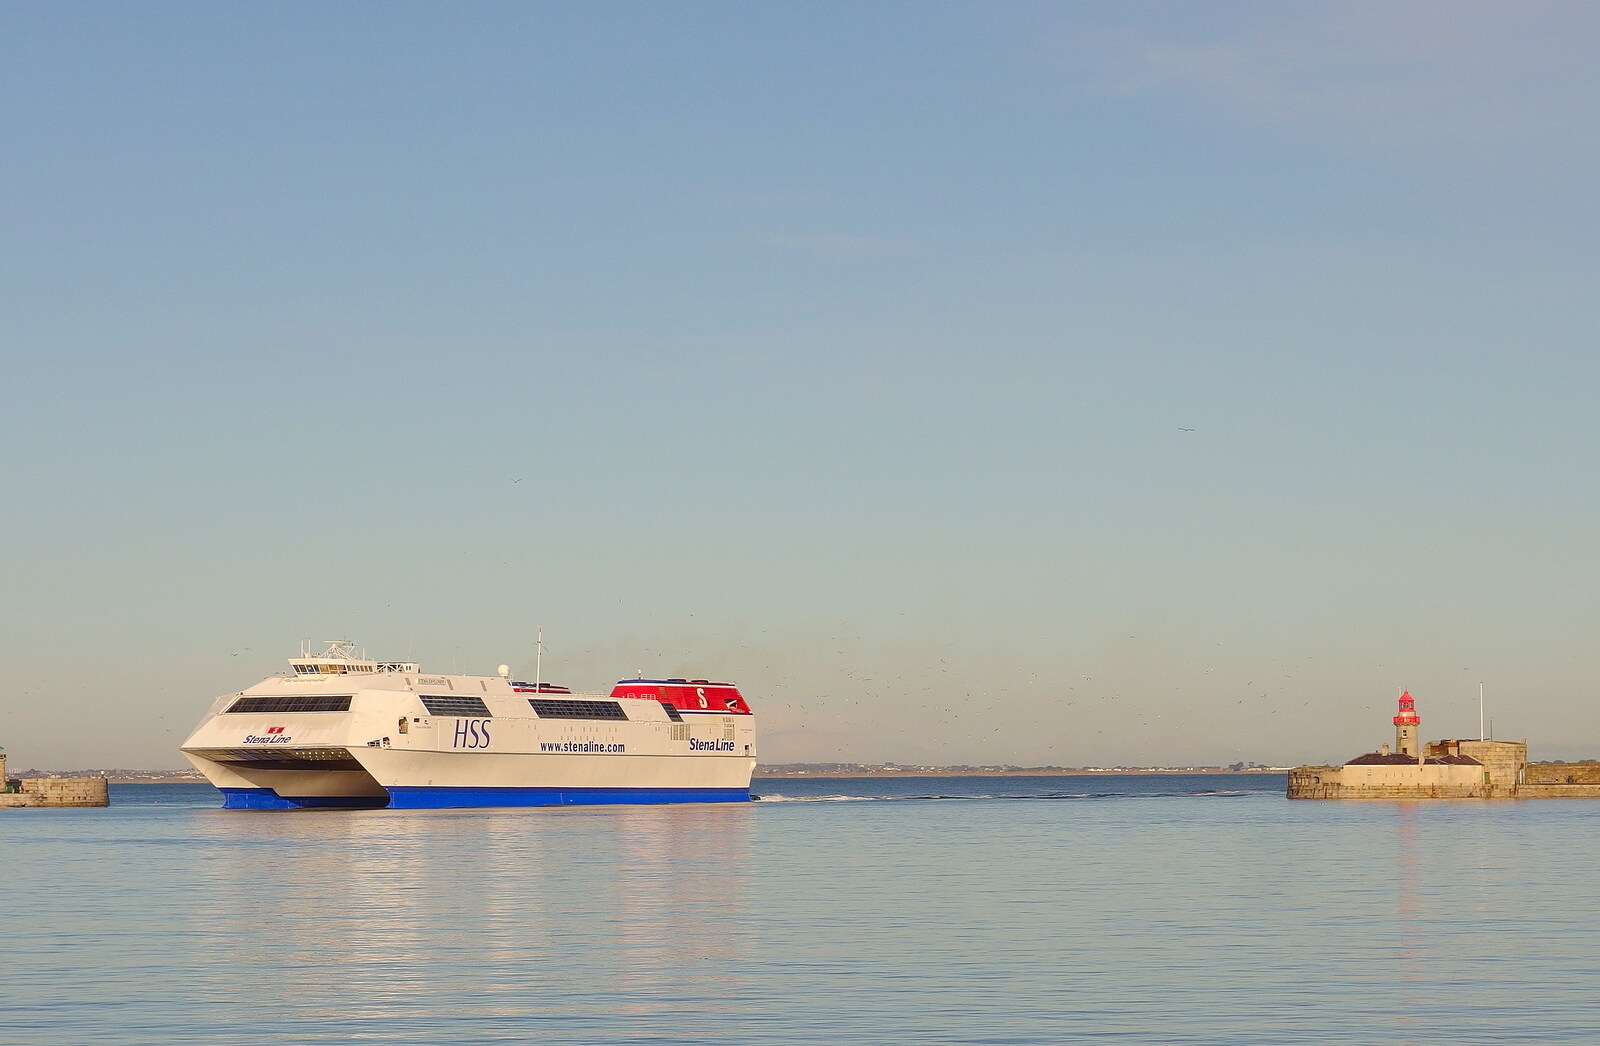 The Stena HSS comes on from Dun Laoghaire and an Electrical Disaster, Monkstown, County Dublin, Ireland - 4th January 2014